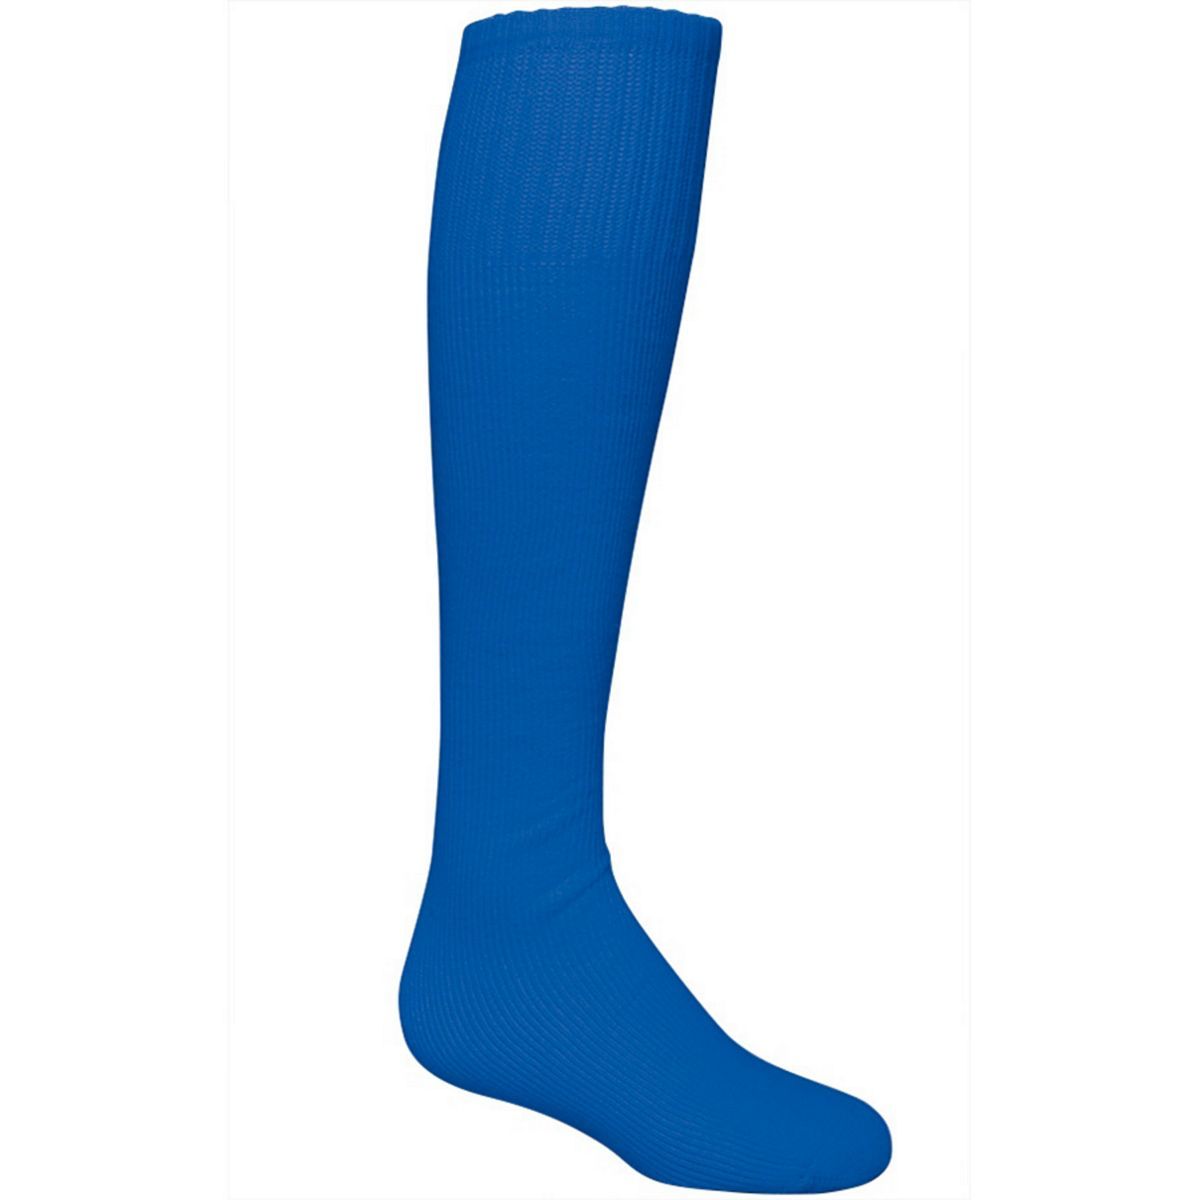 High 5 Athletic  Sock in Royal  -Part of the Accessories, High5-Products, Accessories-Socks product lines at KanaleyCreations.com